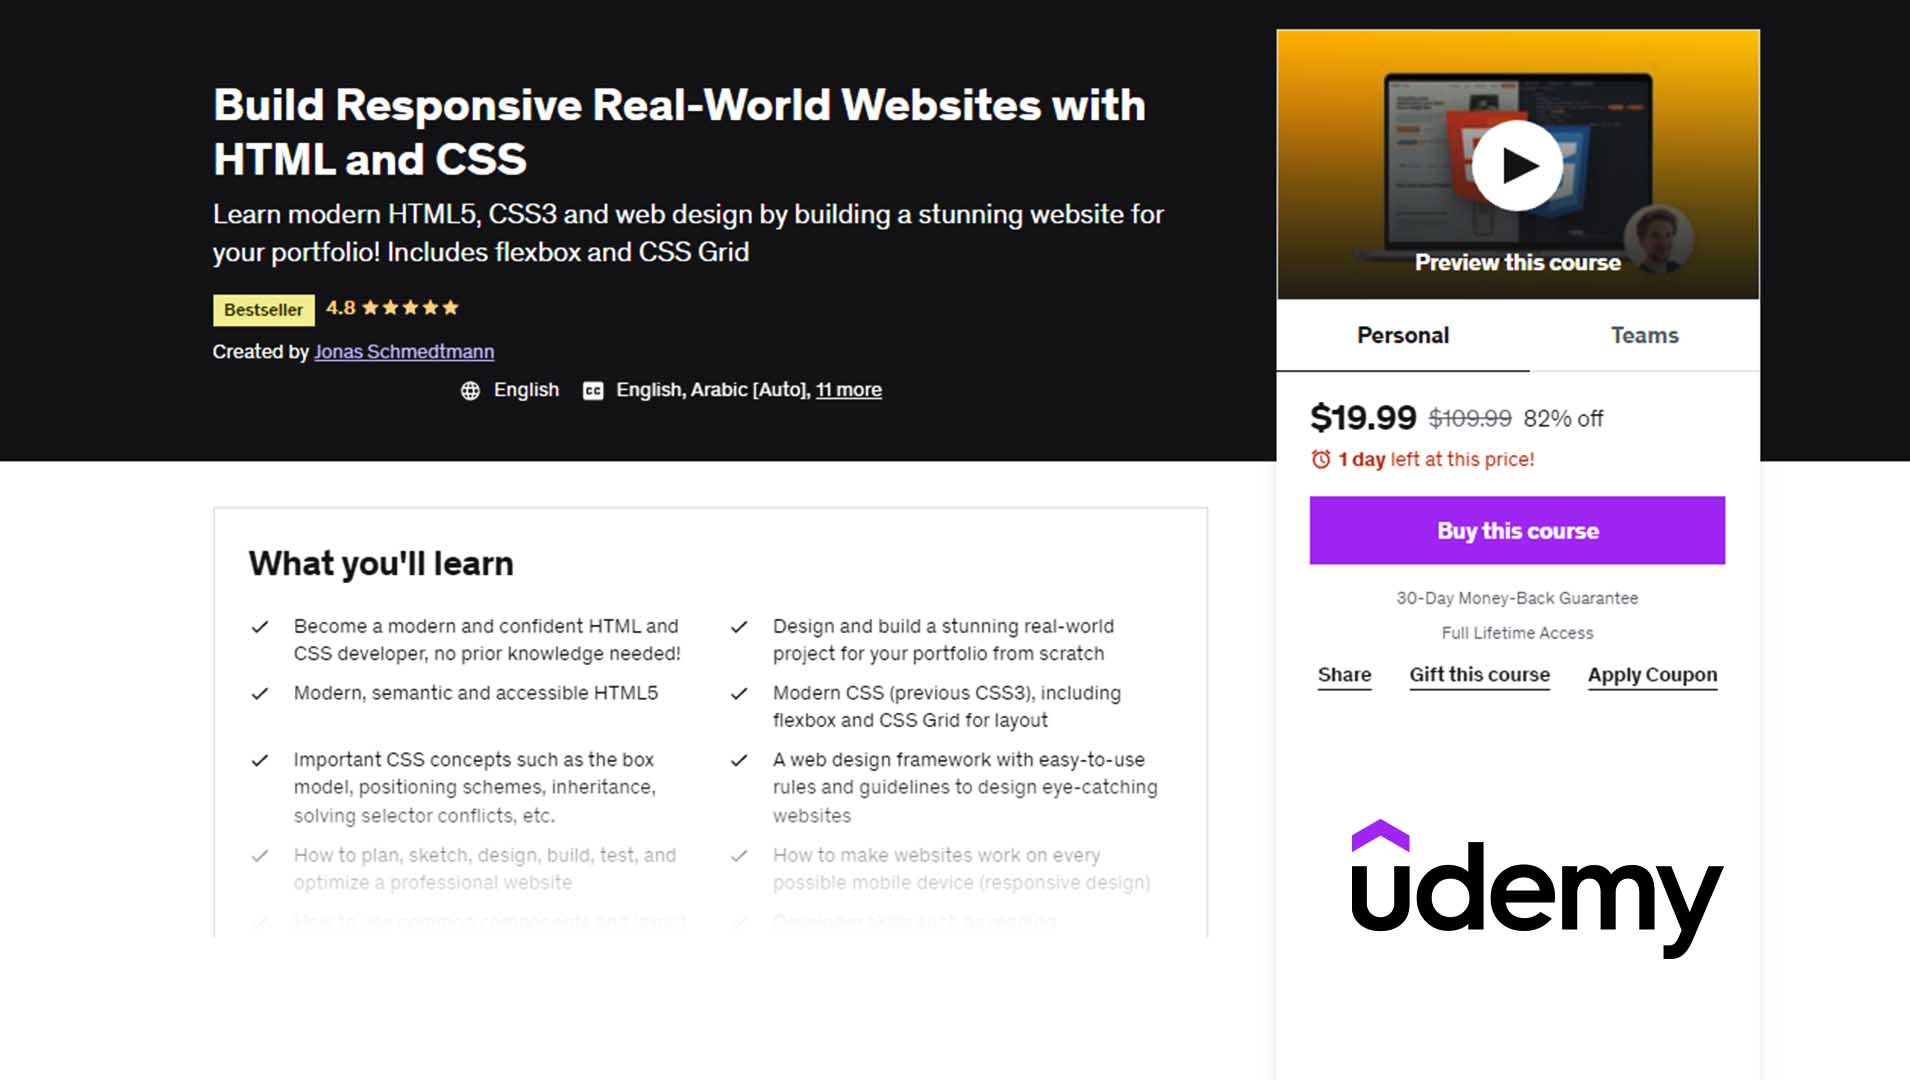 Real-world websites with HTML and CSS